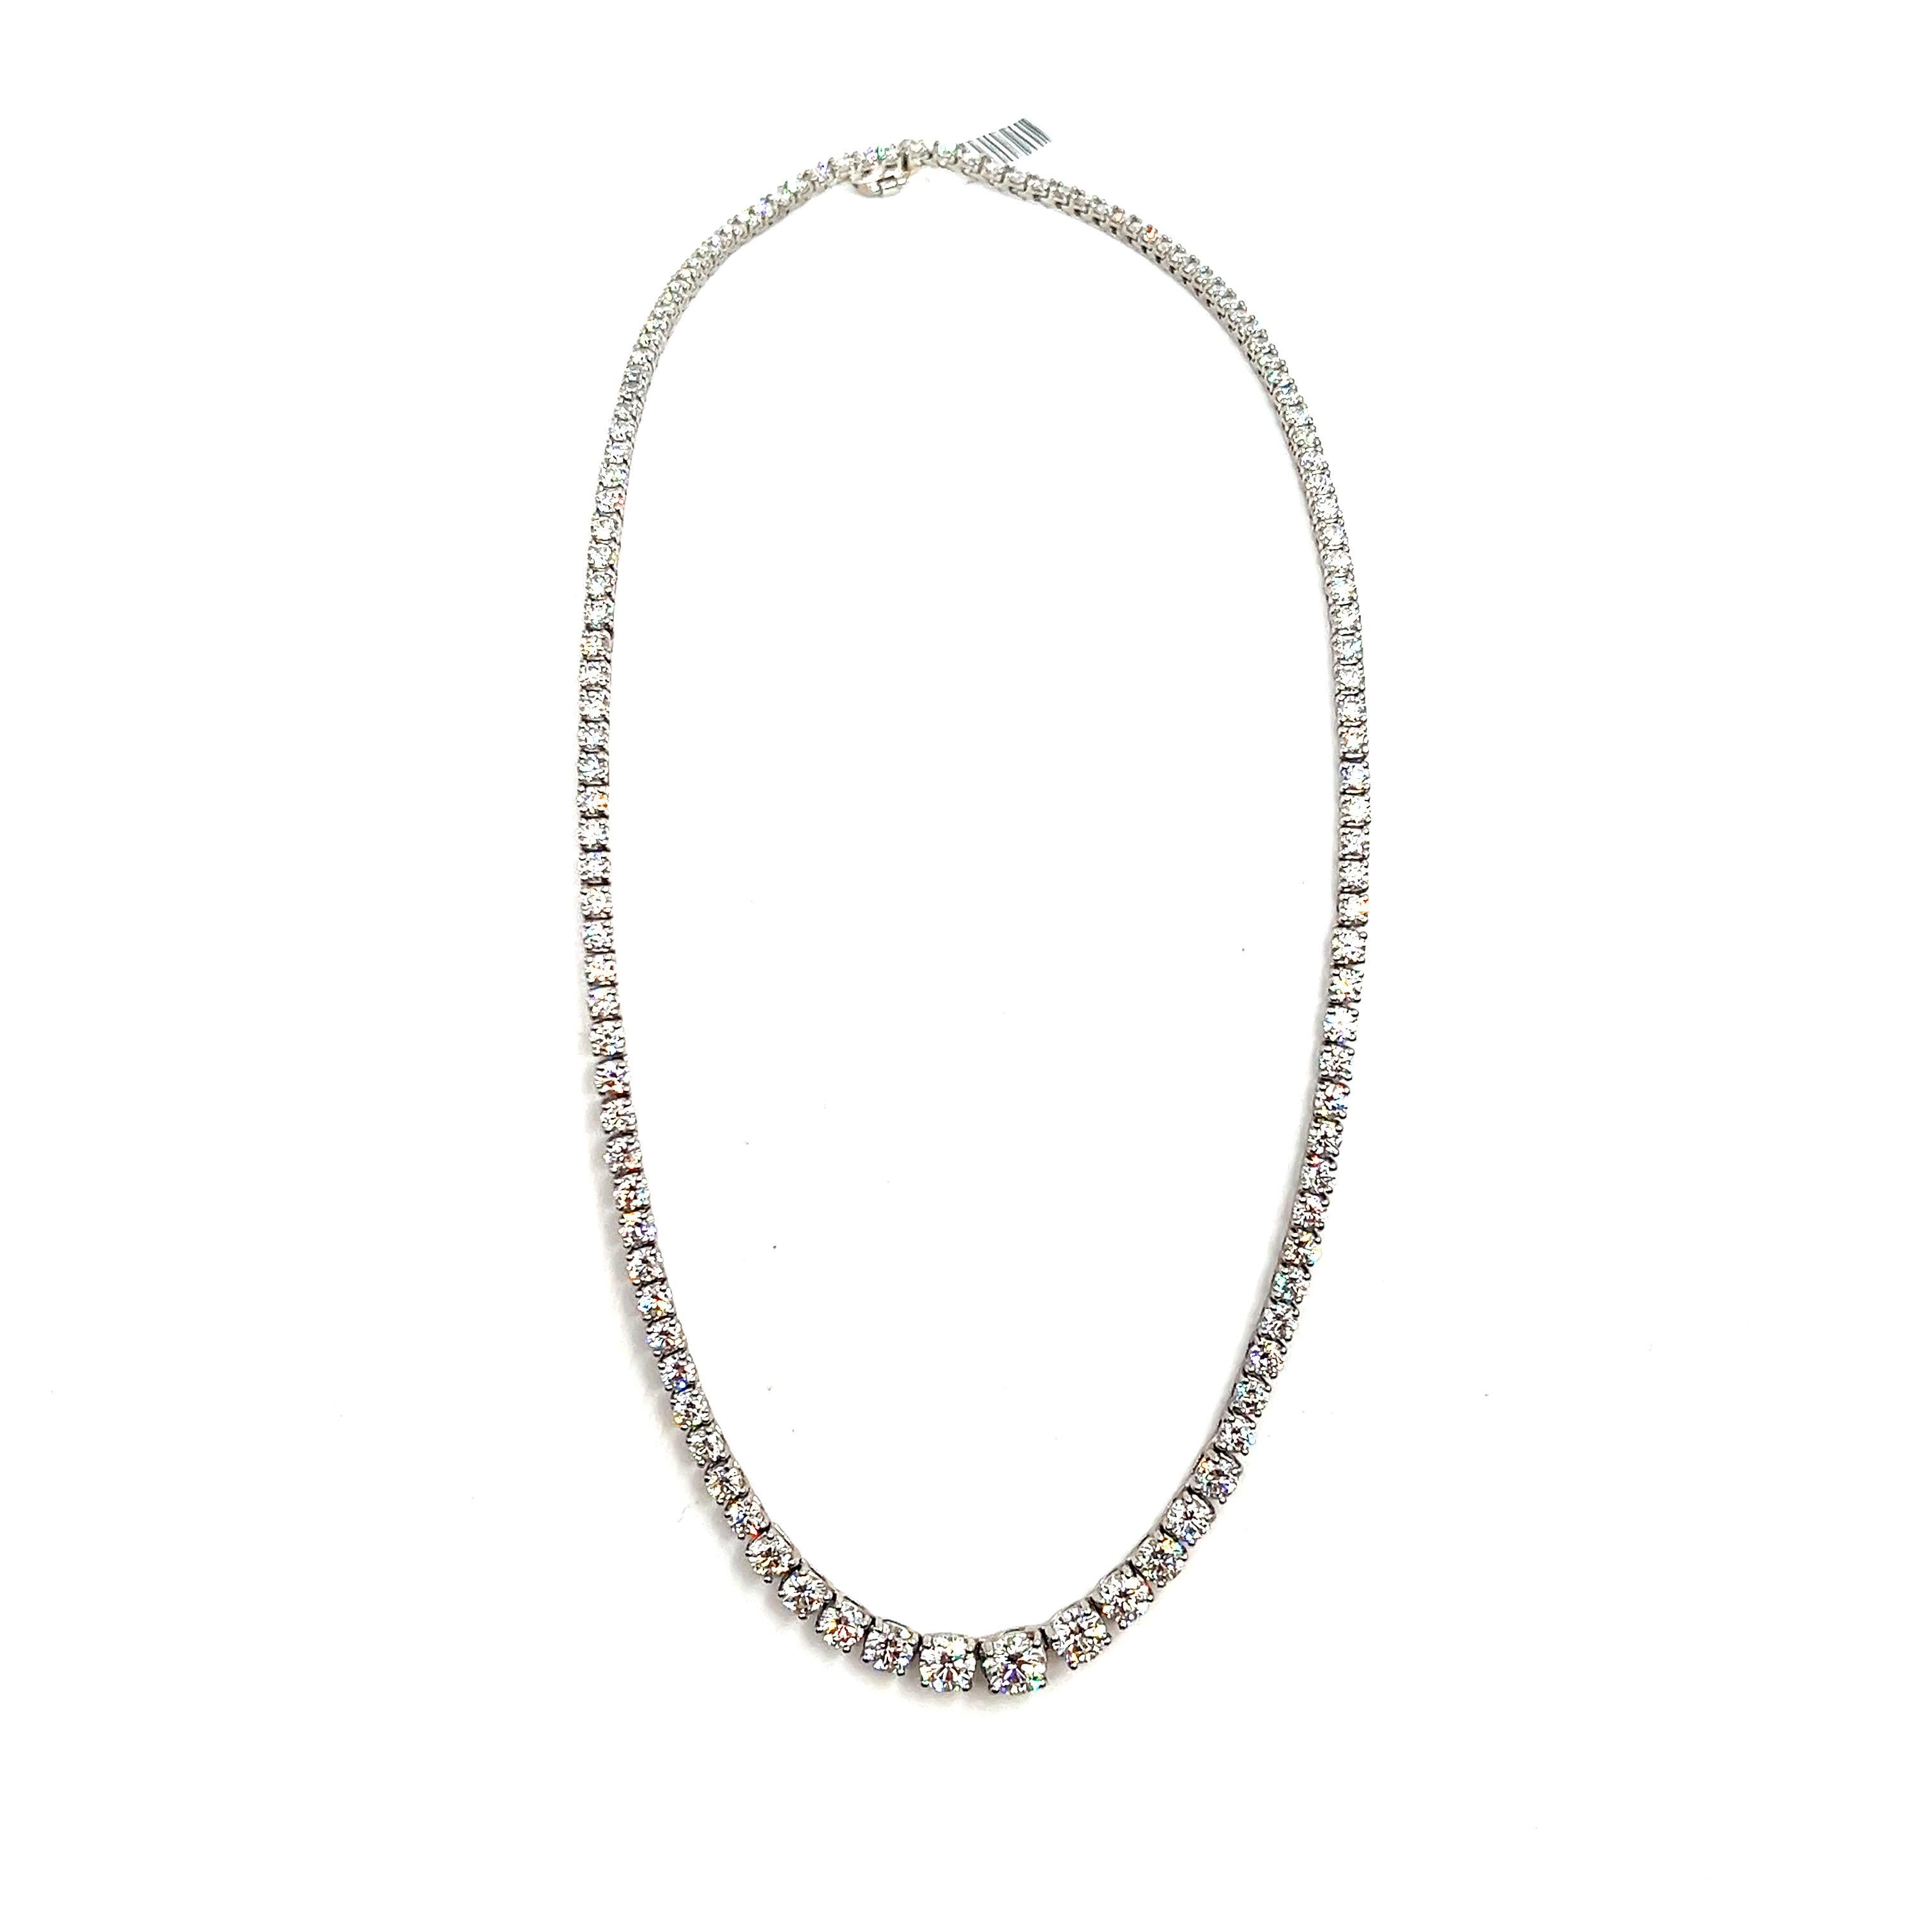 This stunning graduated diamond necklace features 123 diamonds weighing 17.48 ct set in platinum. The diamonds boast a color of F/G with a clarity of VS2/SI1. This must have piece is a definite showstopper for any wardrobe. 